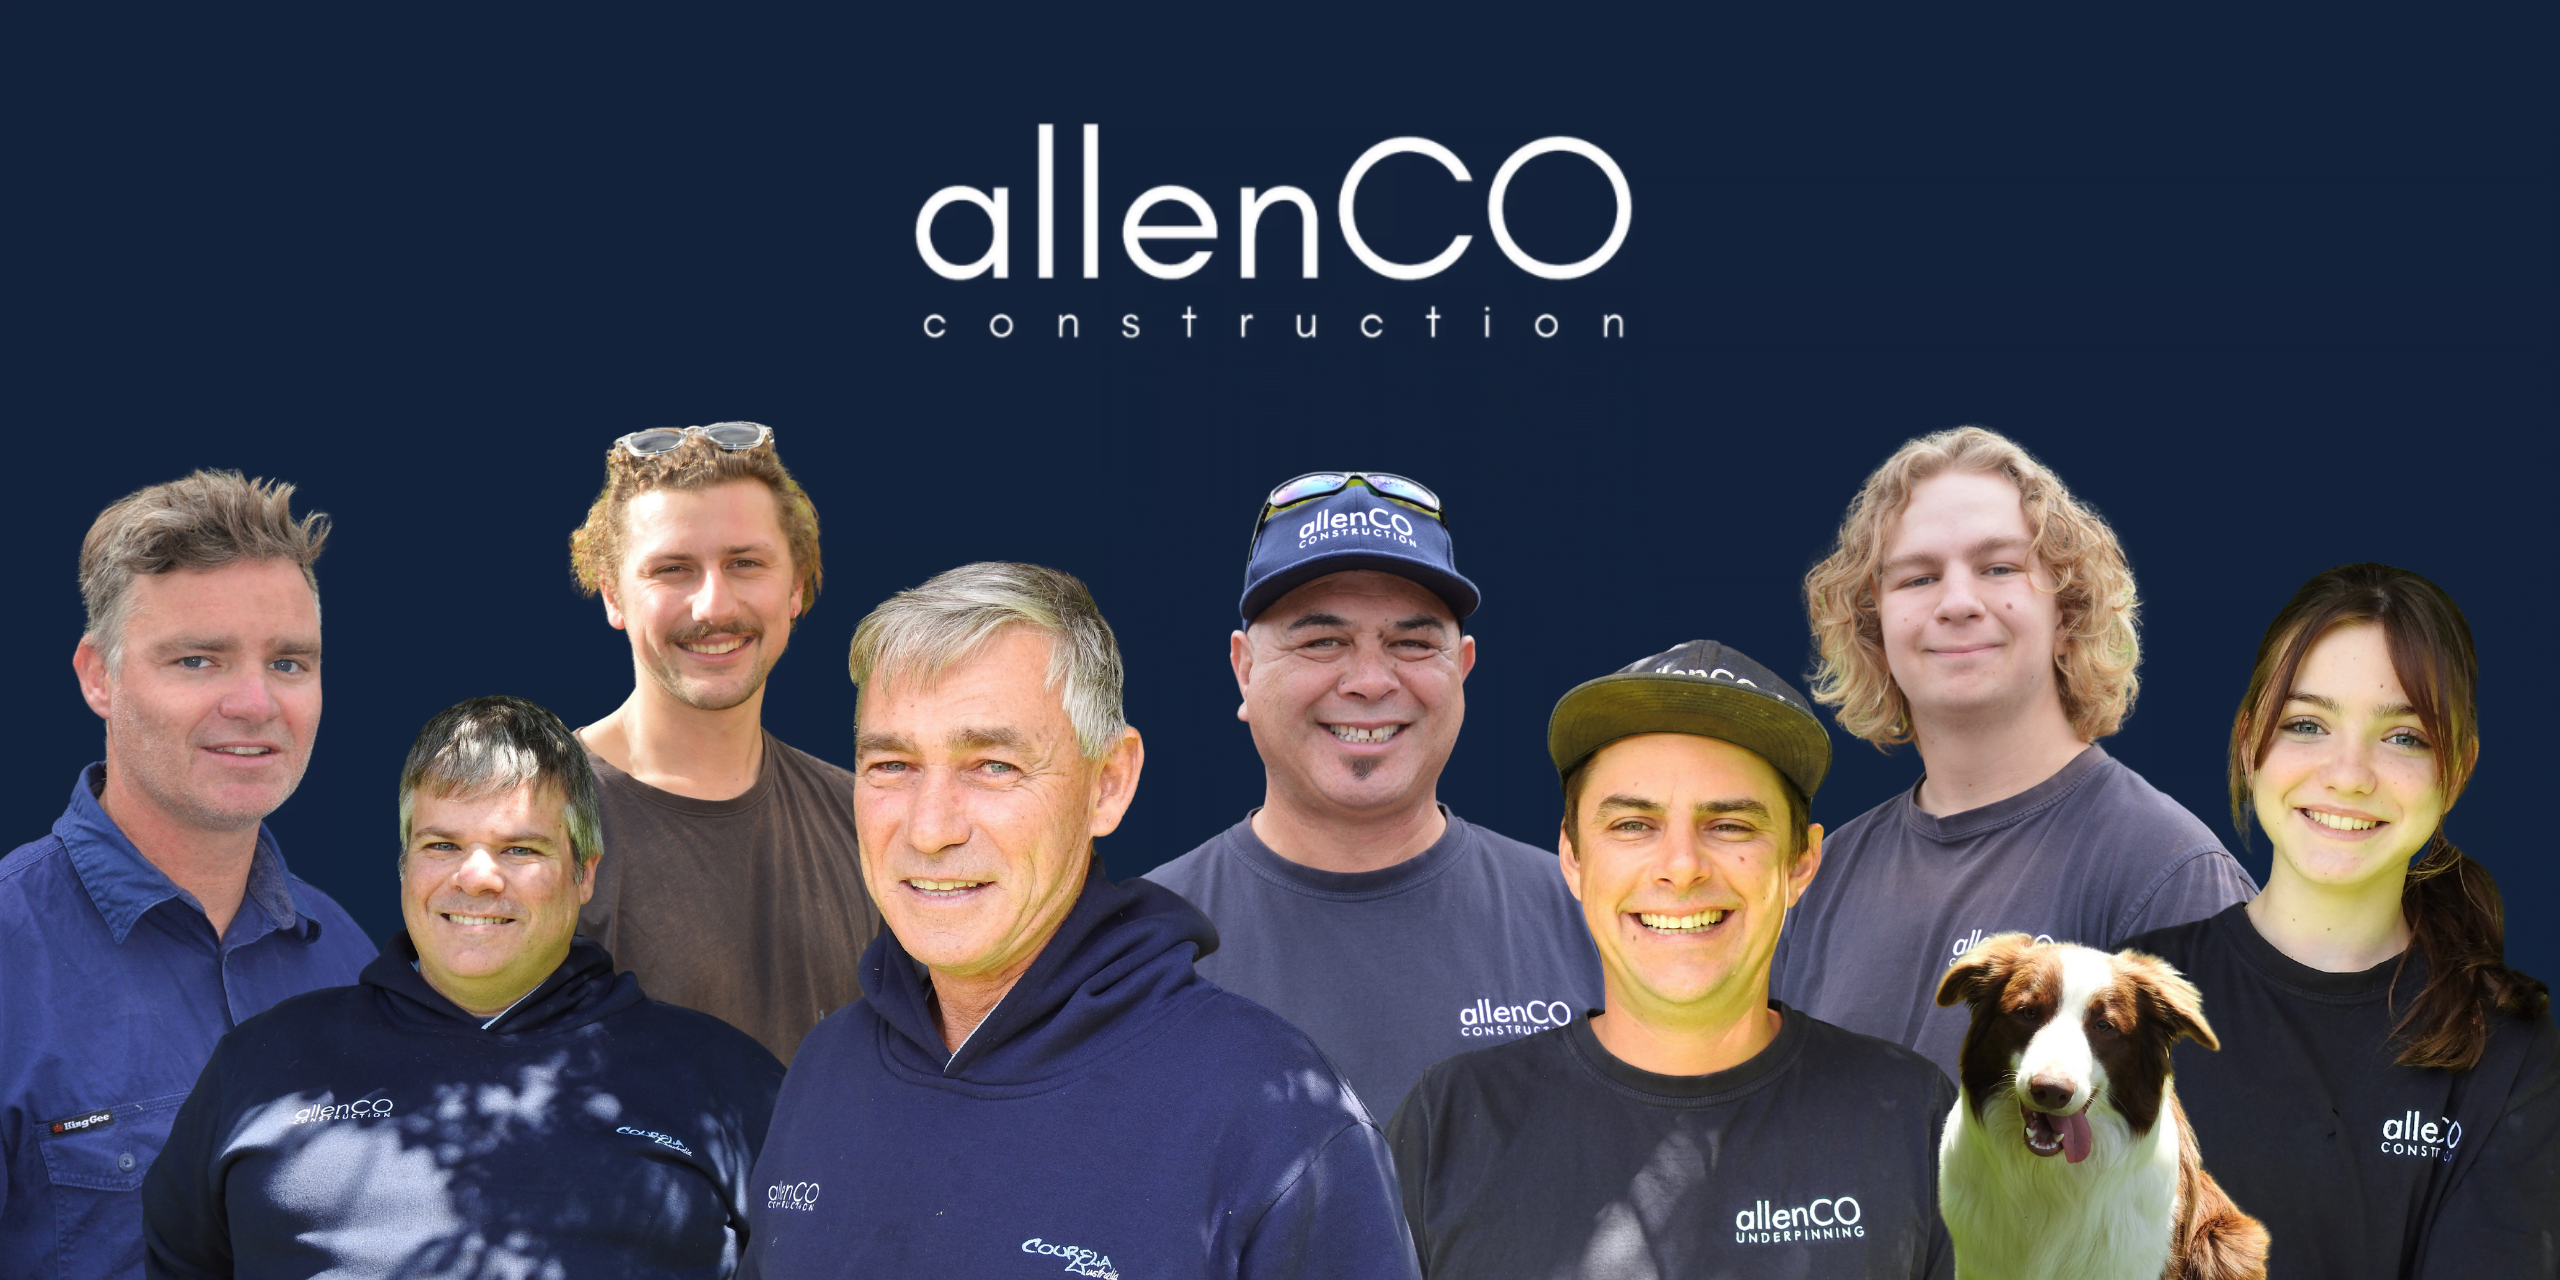 Group photo of the allenco construction team with company logo. There are 8 people and 1 dog